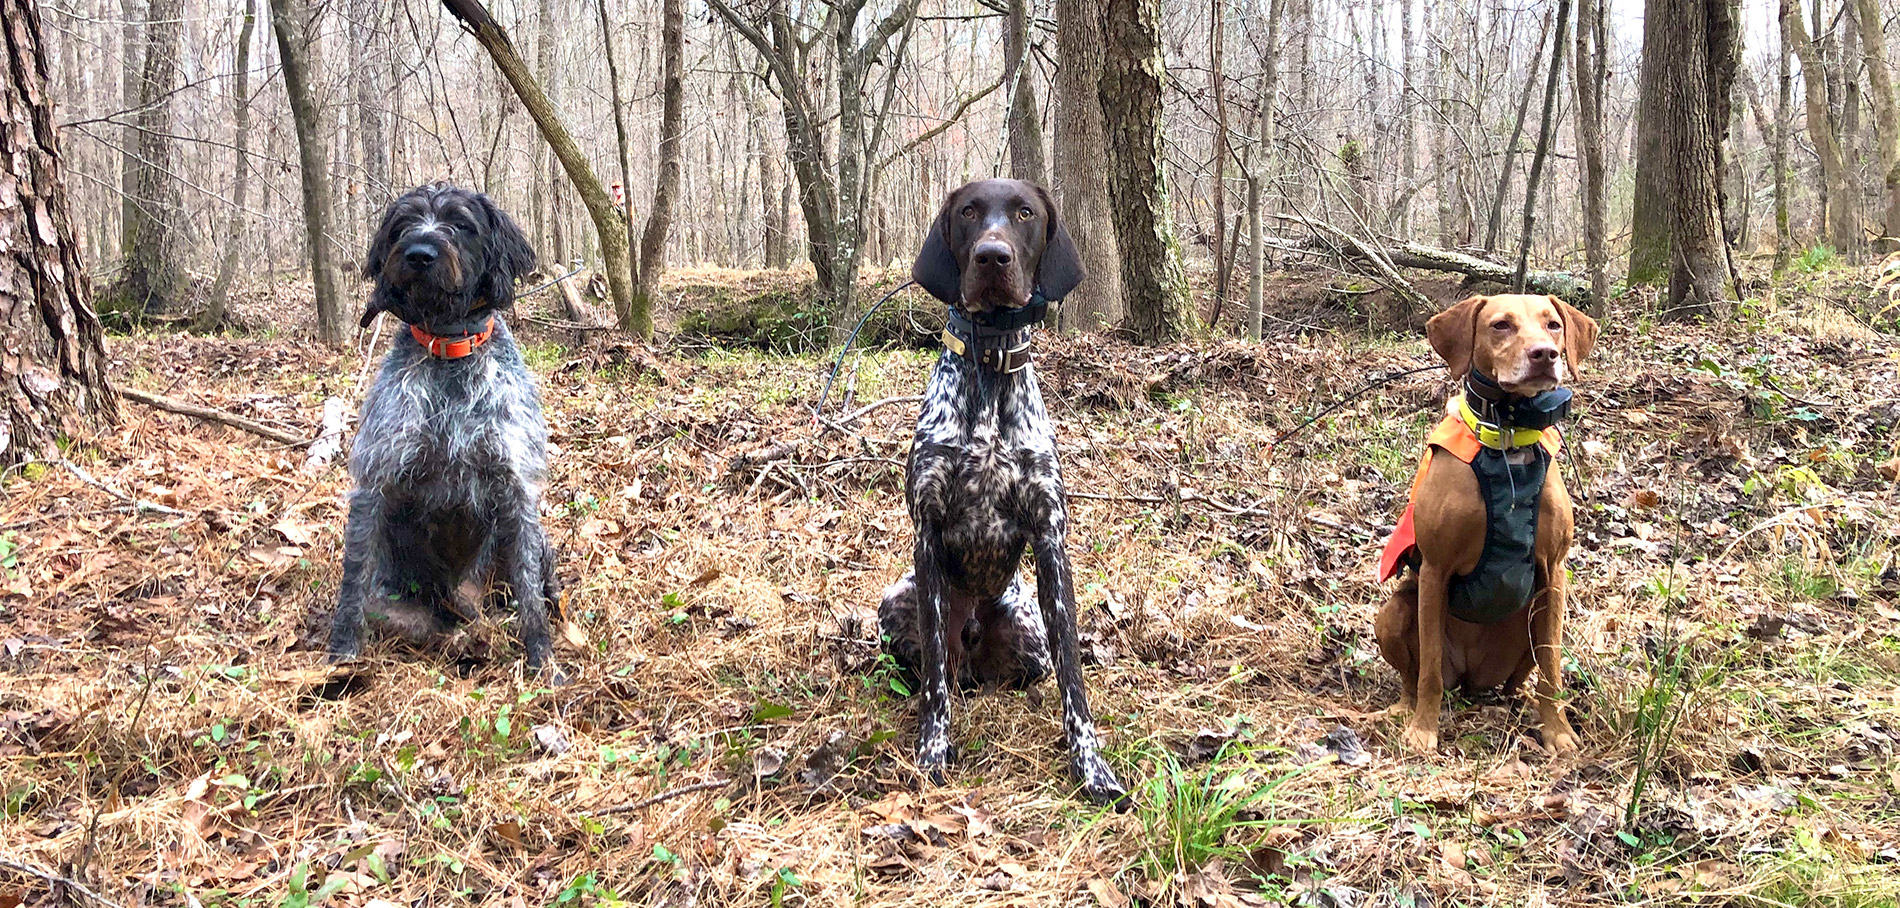 Gus the GWP, Aries the DK, and Zara the vizsla